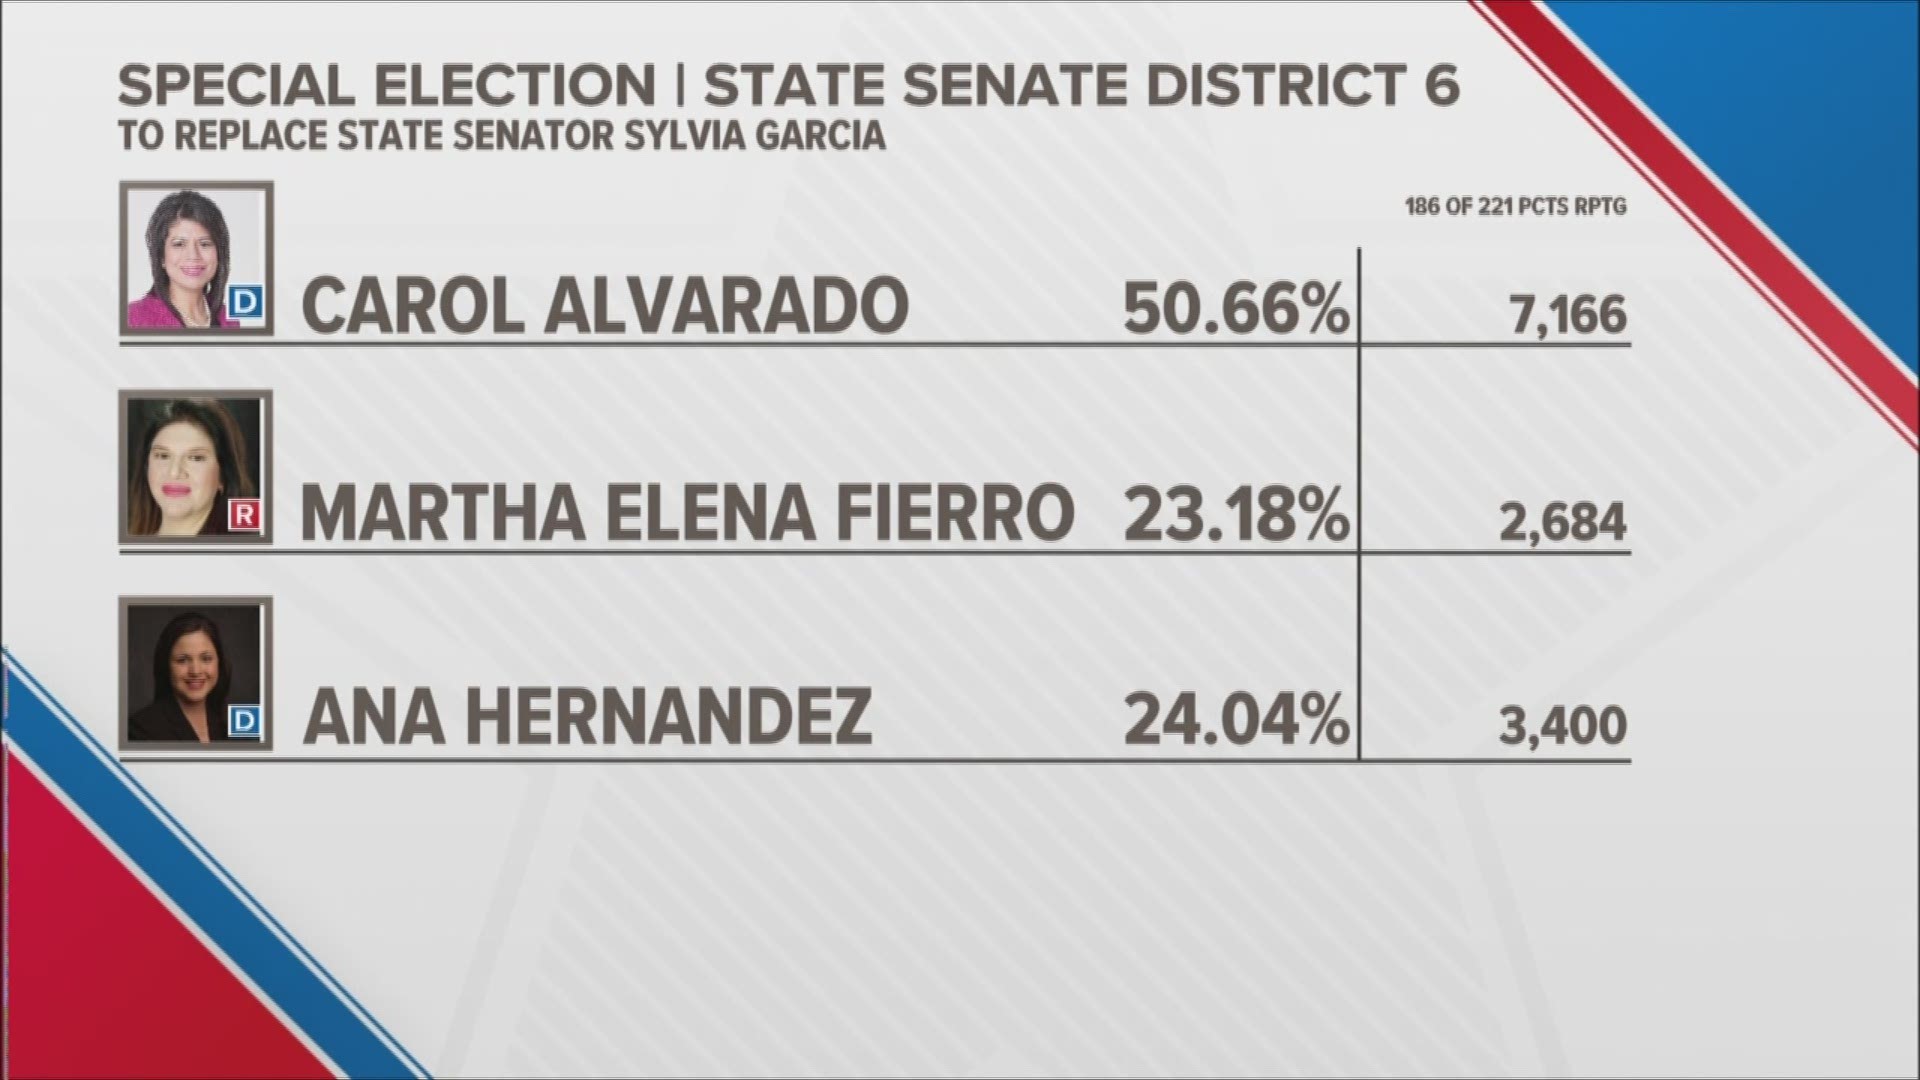 State Rep. Carol Alvarado narrowly avoided a runoff with fellow Democratic Rep. Ana Hernandez to win a special election for the state Senate District 6 seat.